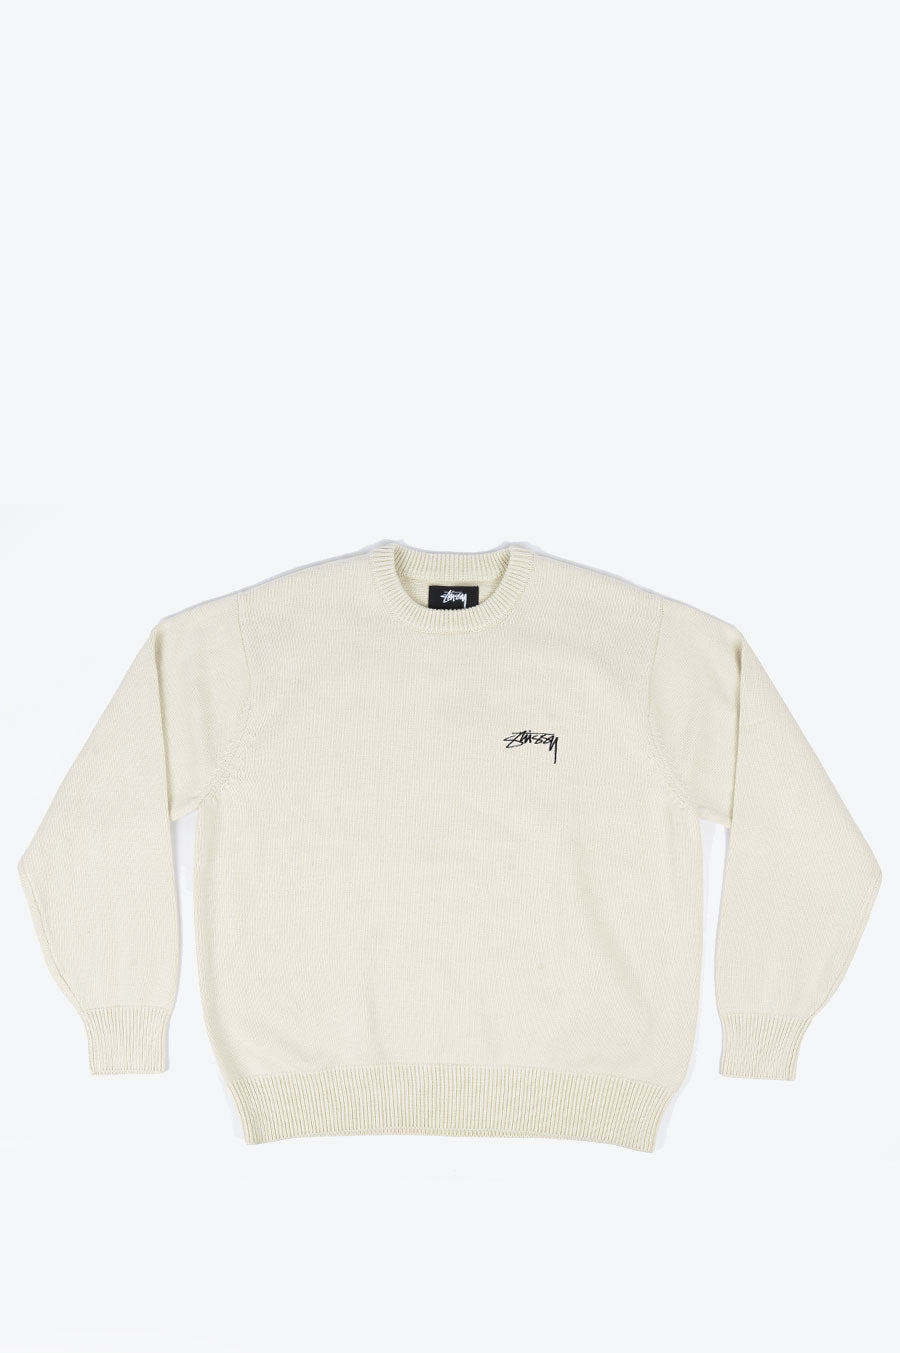 STUSSY CARE LABEL SWEATER NATURAL – BLENDS